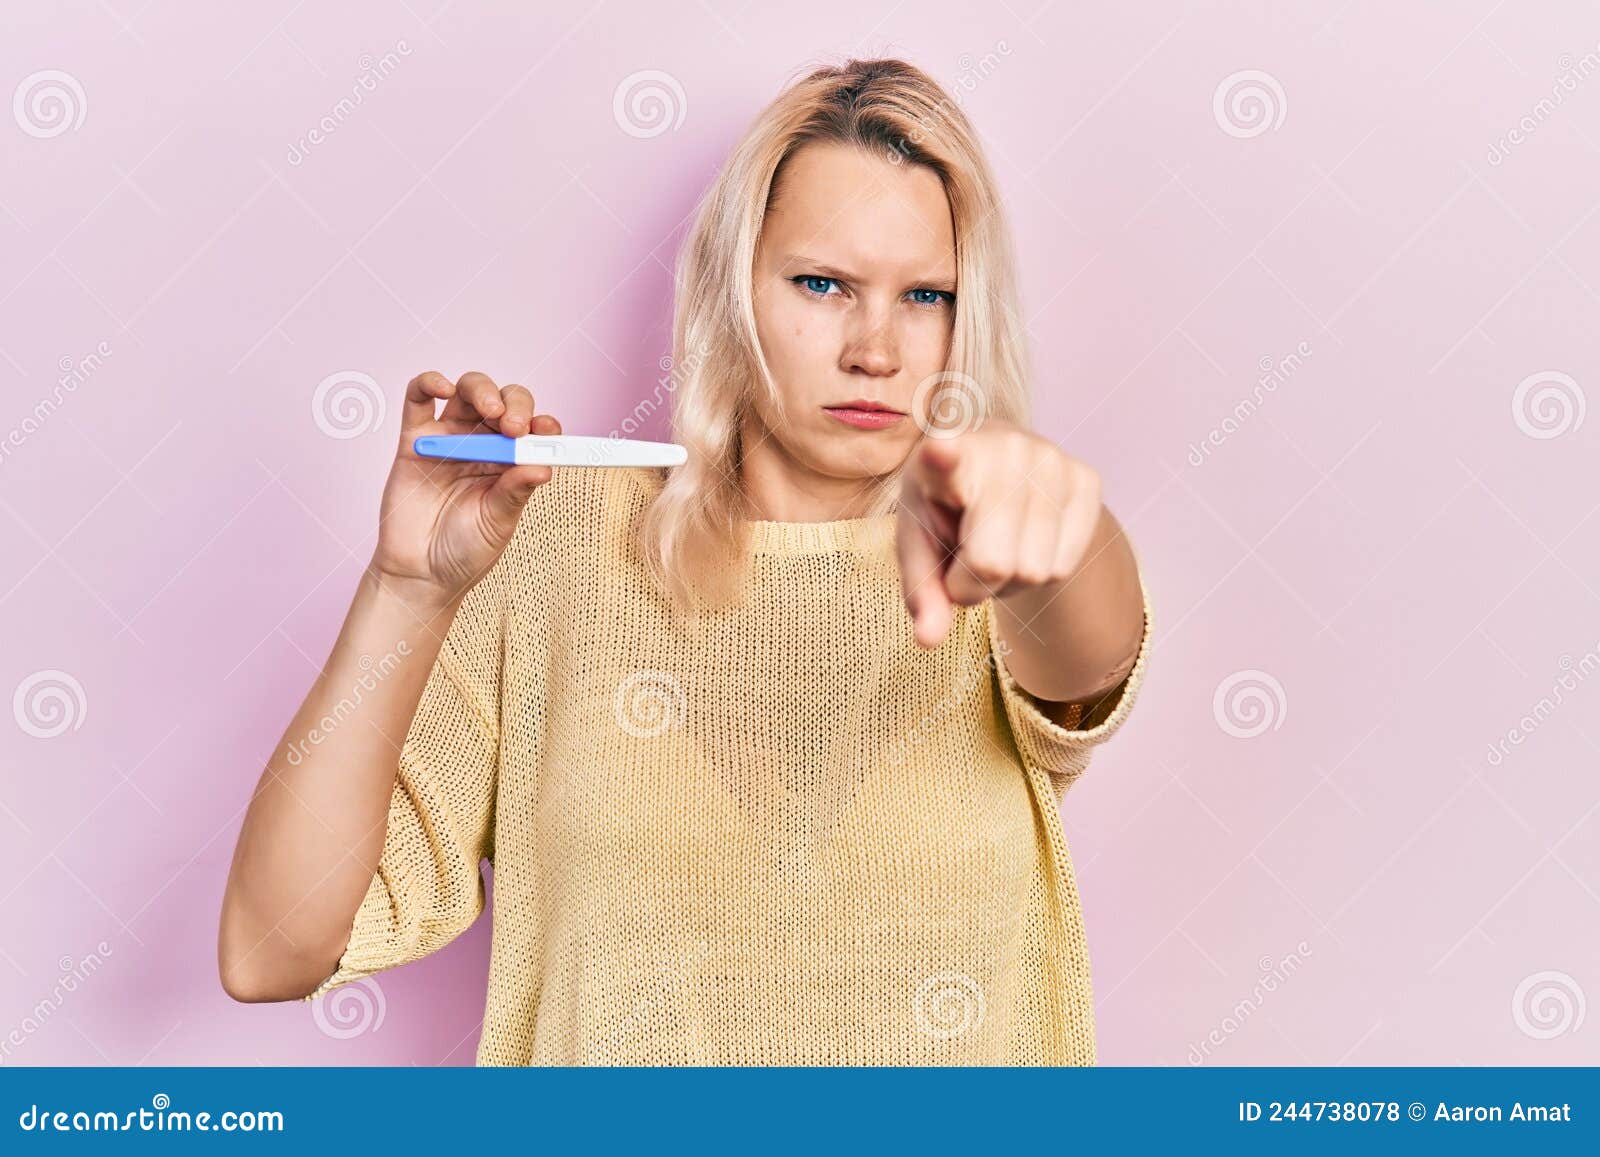 Beautiful Caucasian Blonde Woman Holding Pregnancy Test Result Pointing With Finger To The